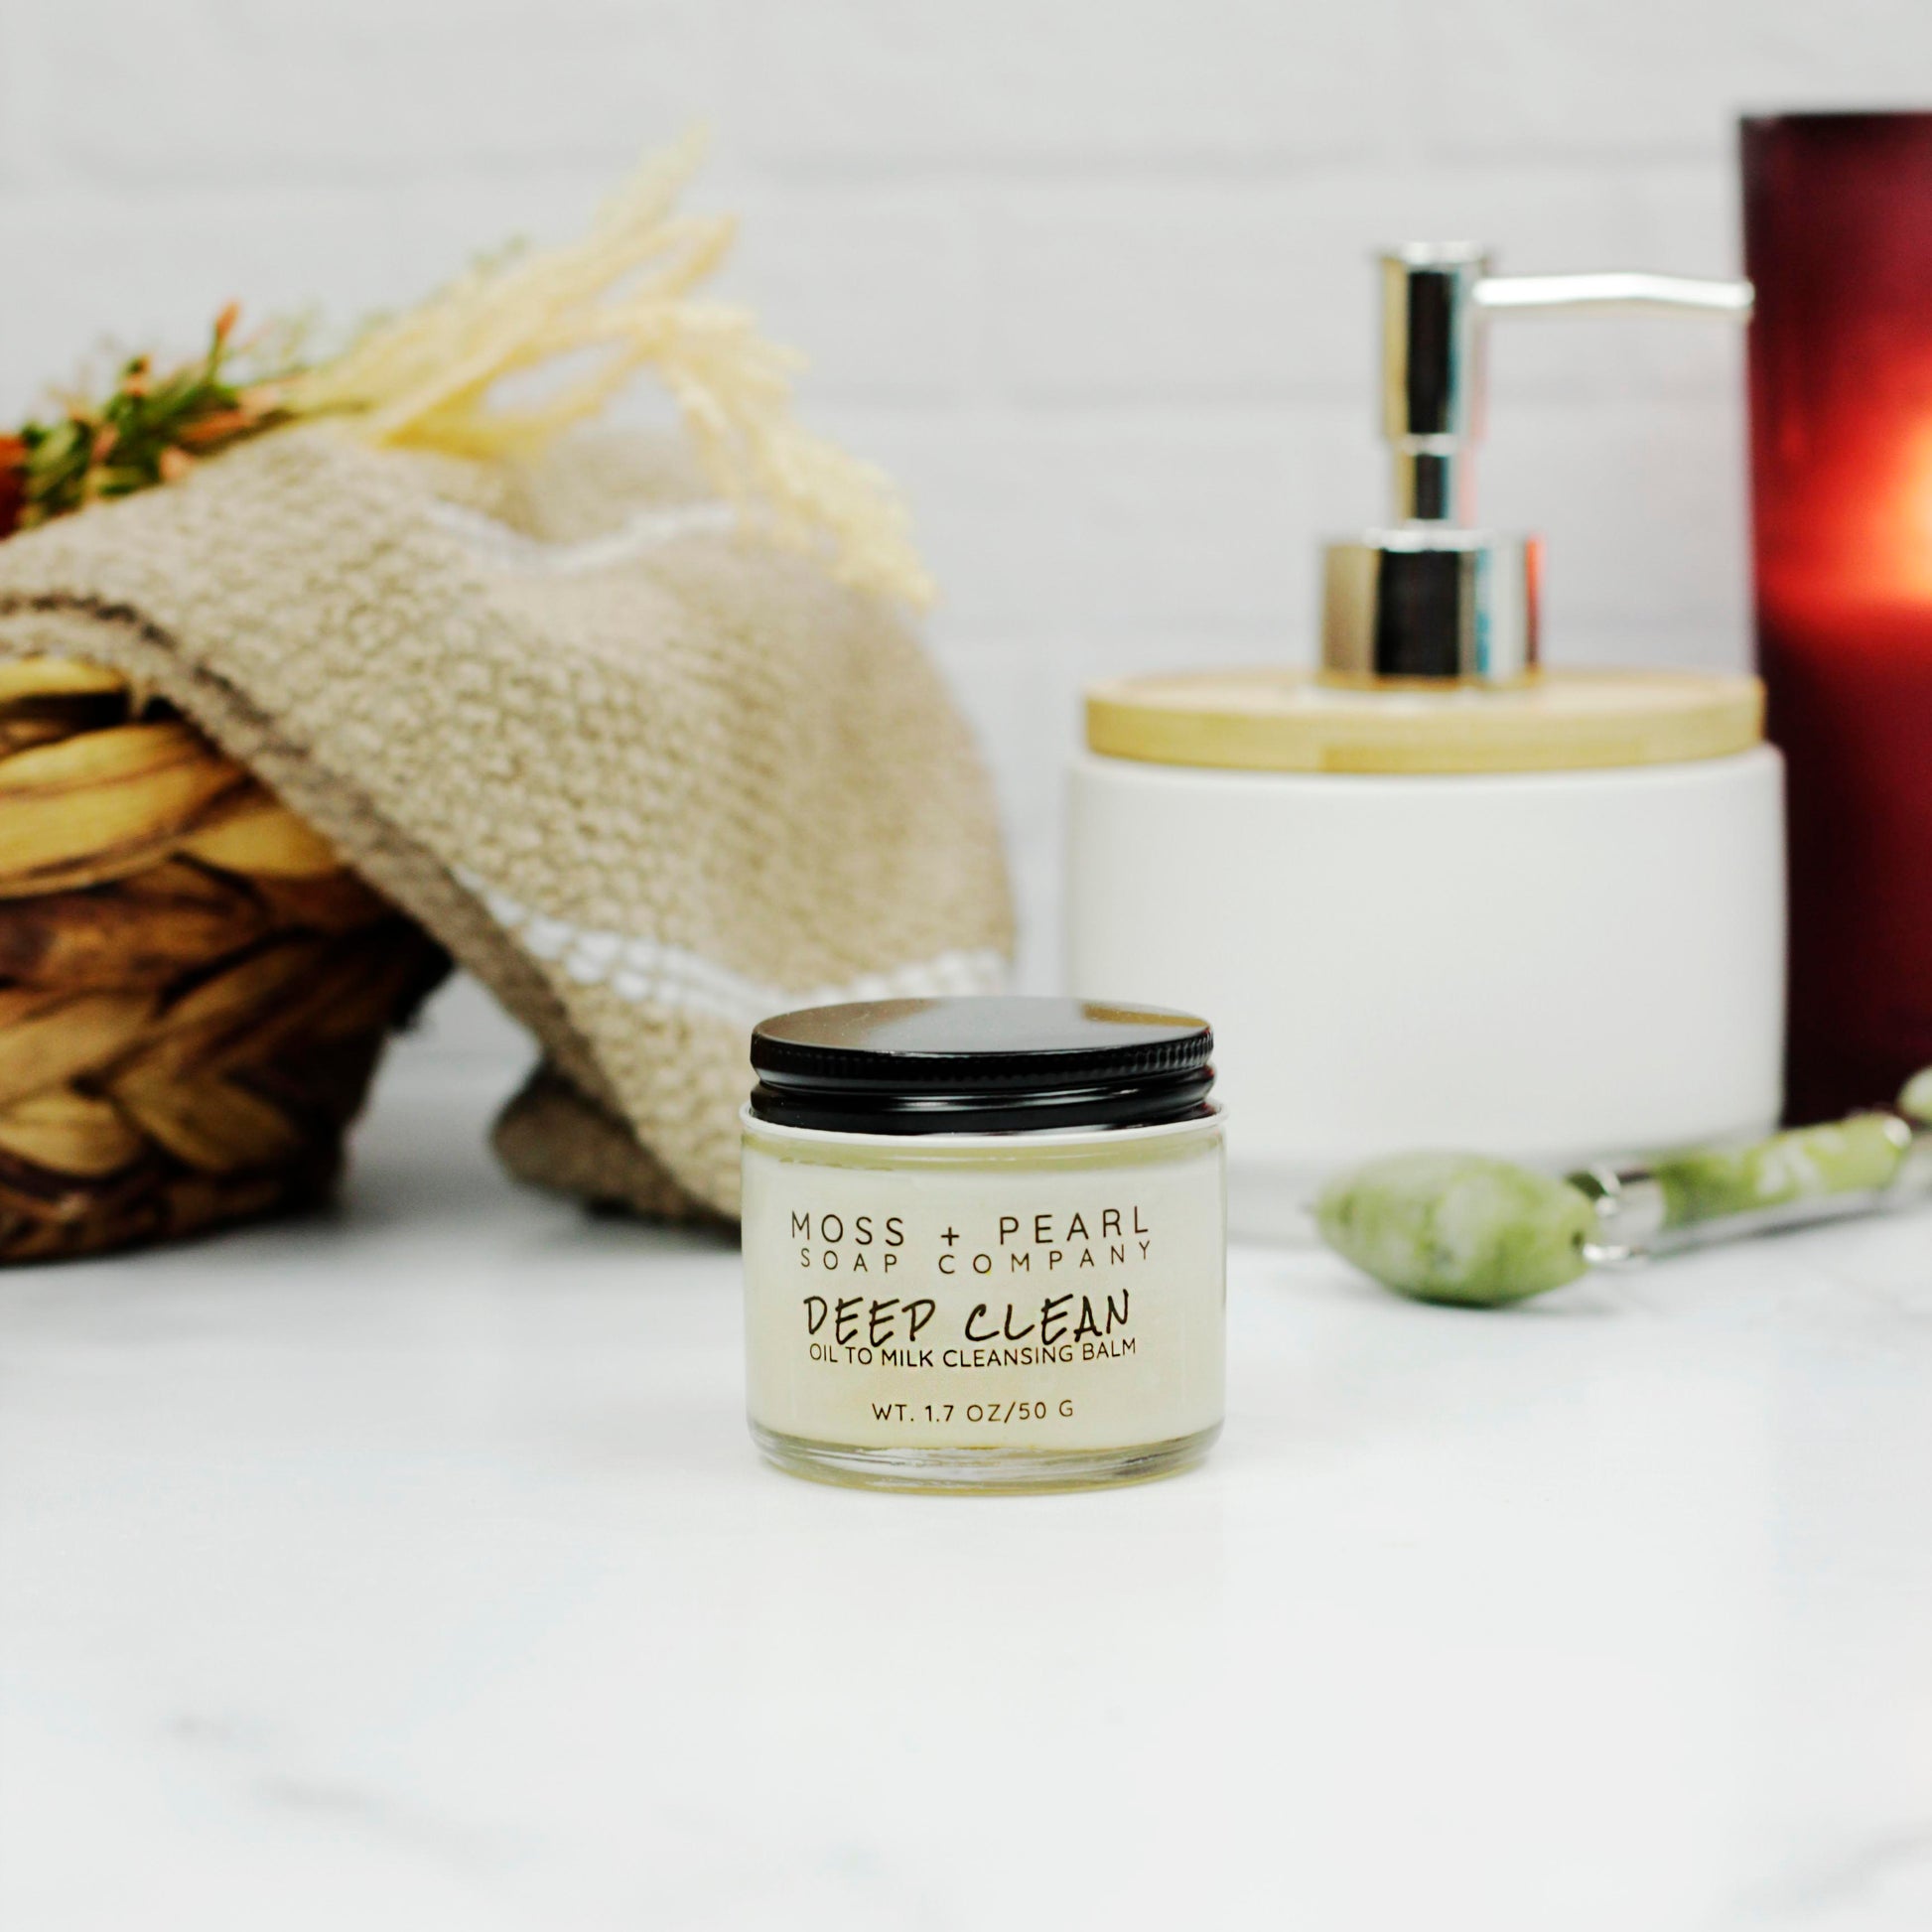 DEEP CLEAN CLEANSING BALM Moss + Pearl Soap Company